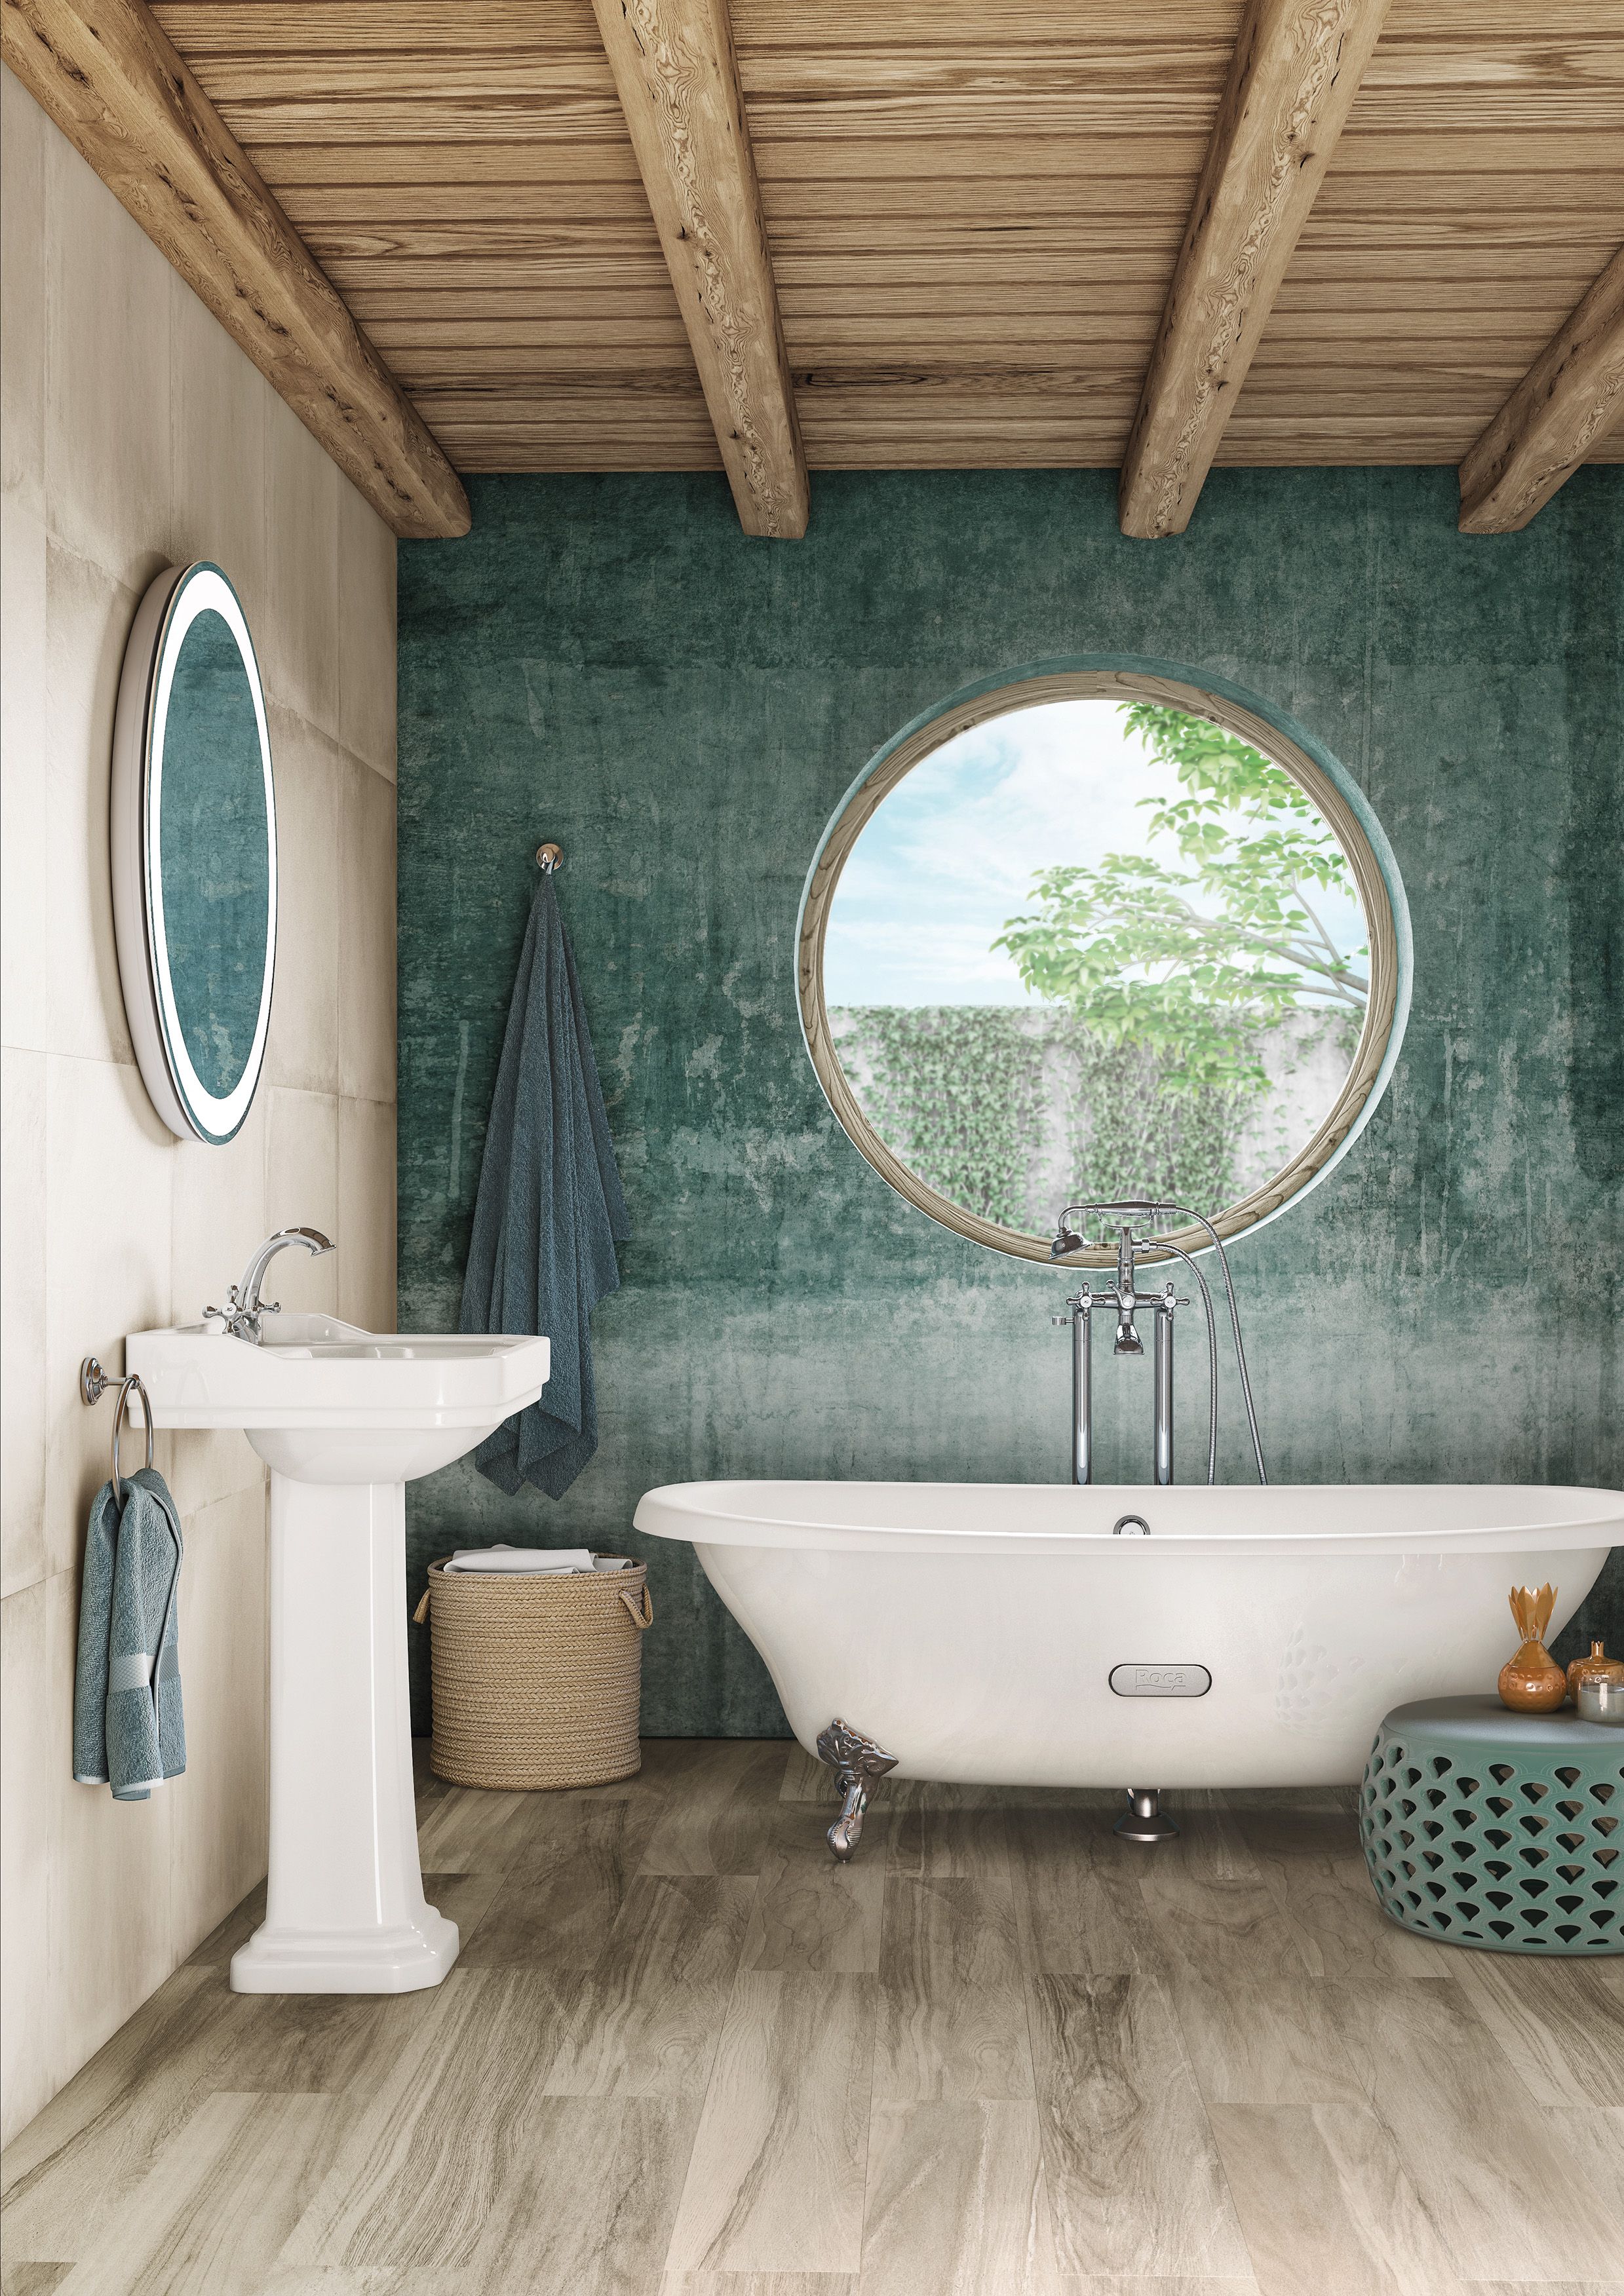 16 Country Bathroom Ideas To Inspire Your Decorating Choices